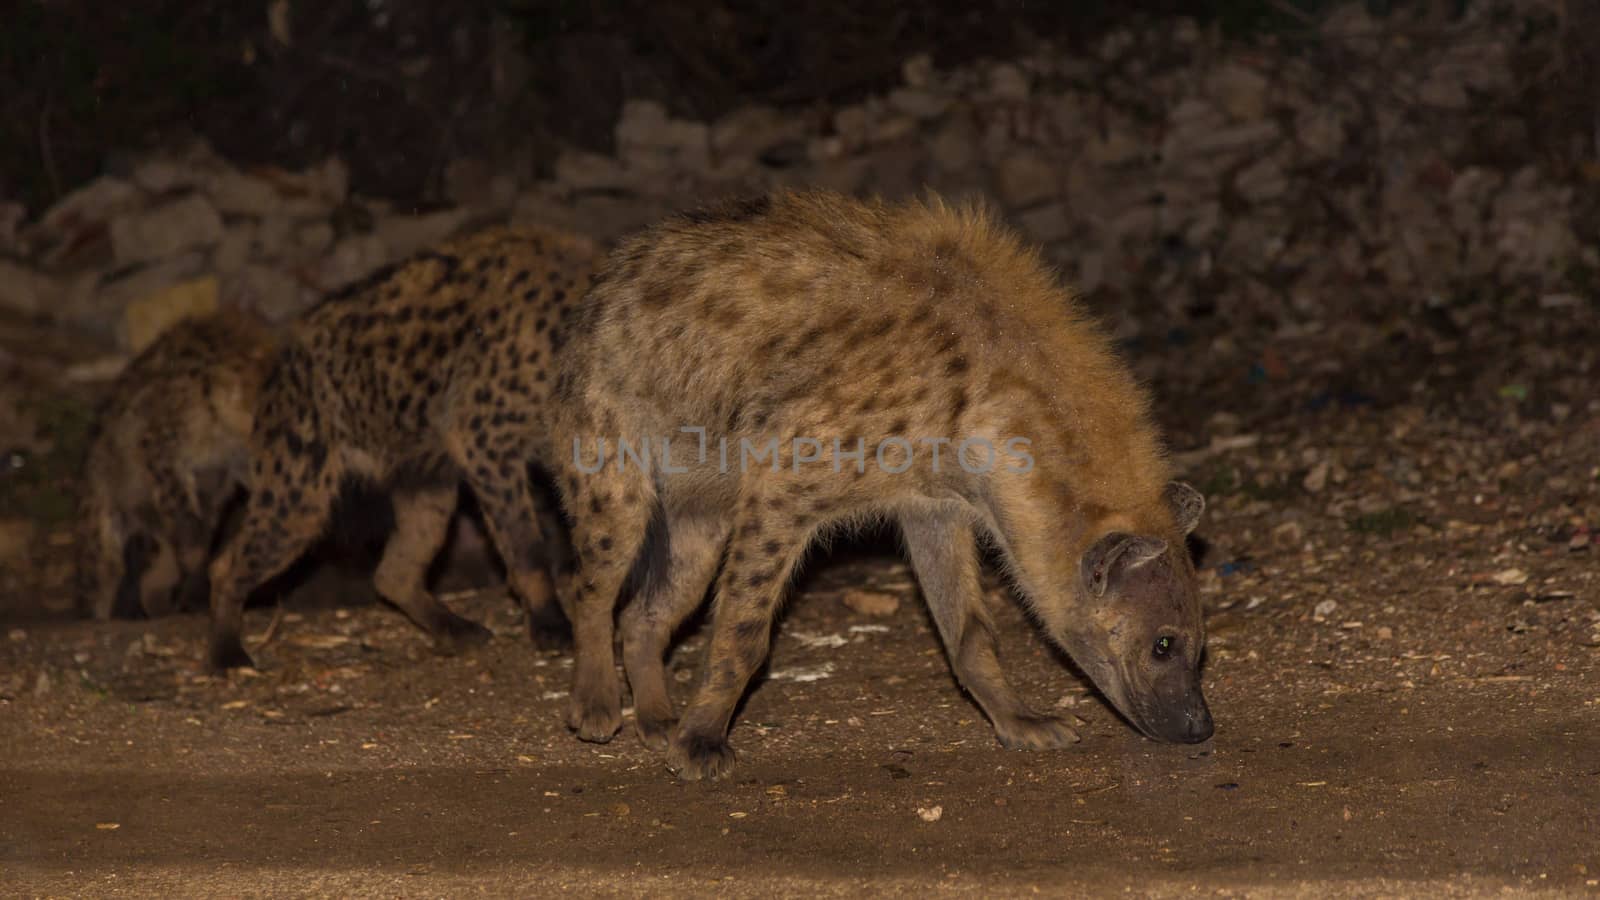 Spotted wild hyenas searching for food to scavenge near the city borders of Harar in Ethiopia